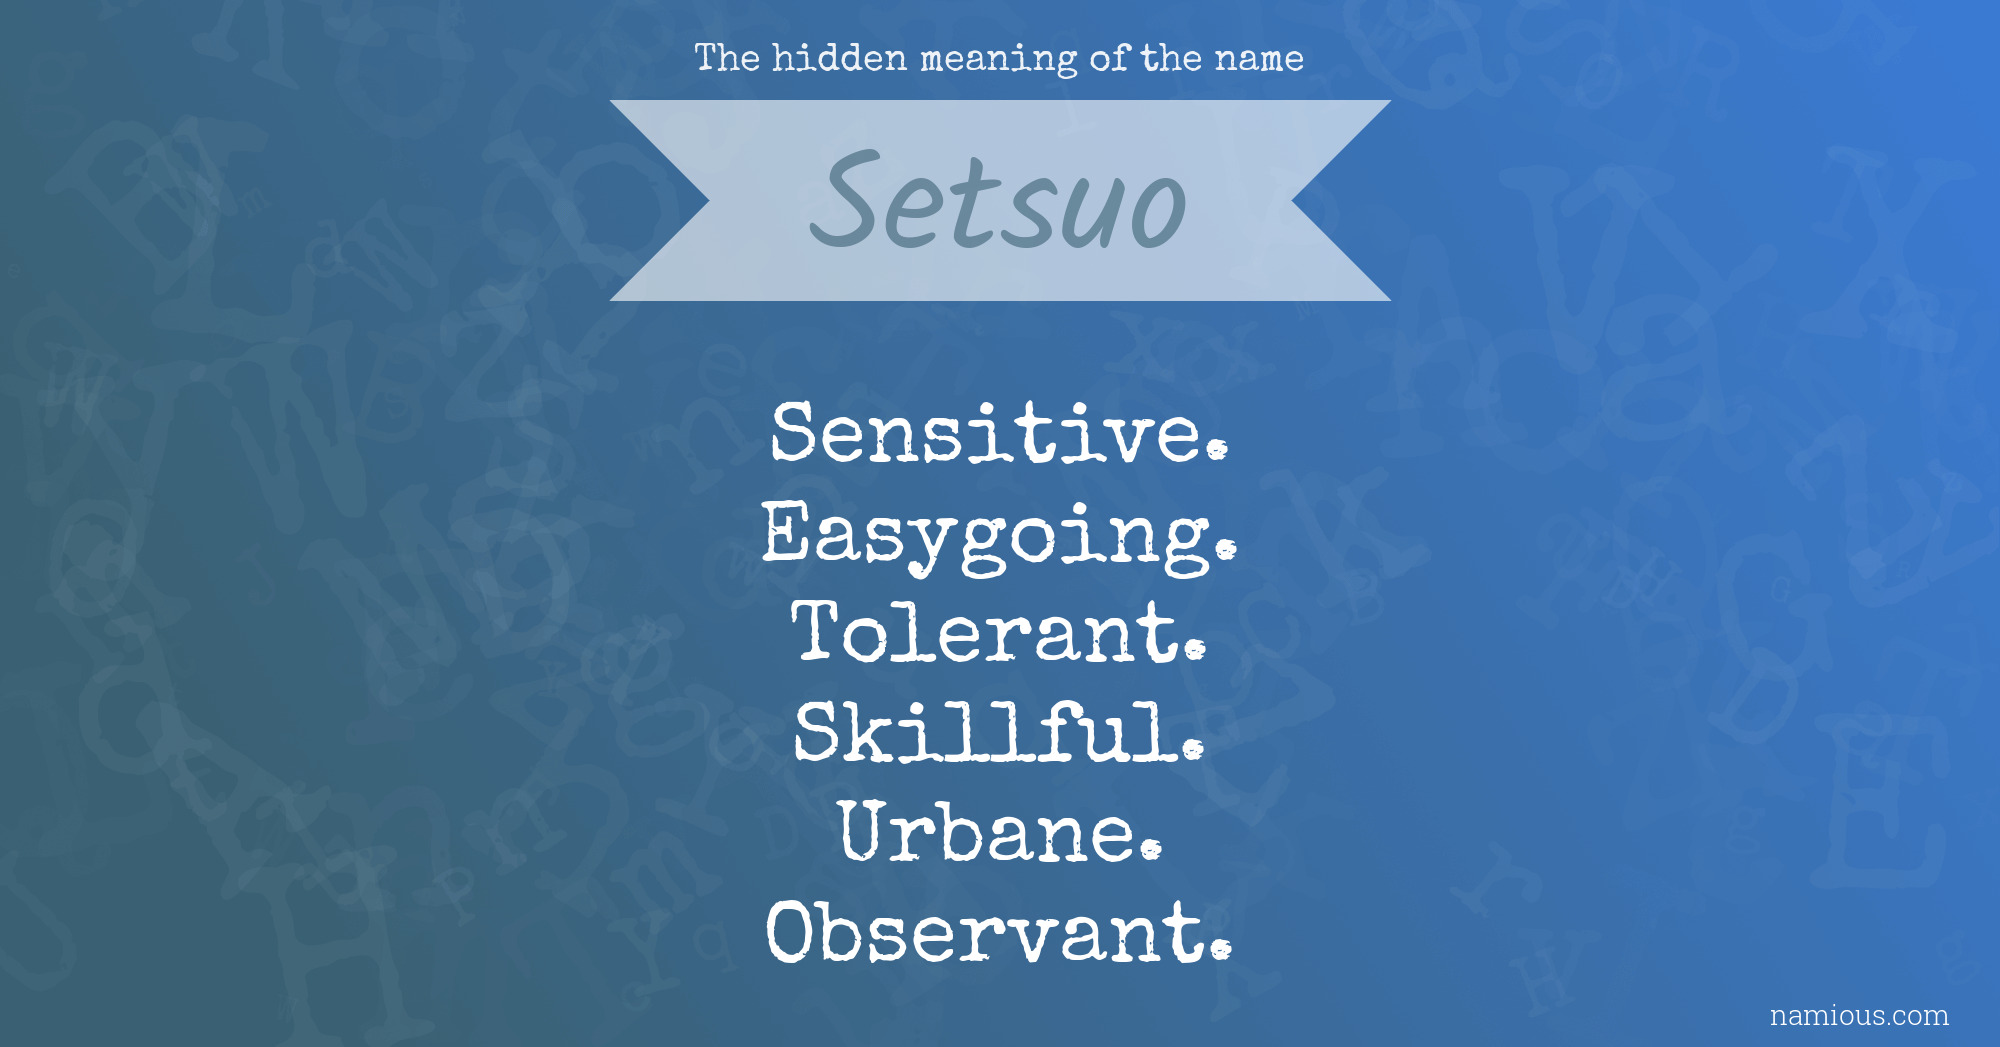 The hidden meaning of the name Setsuo